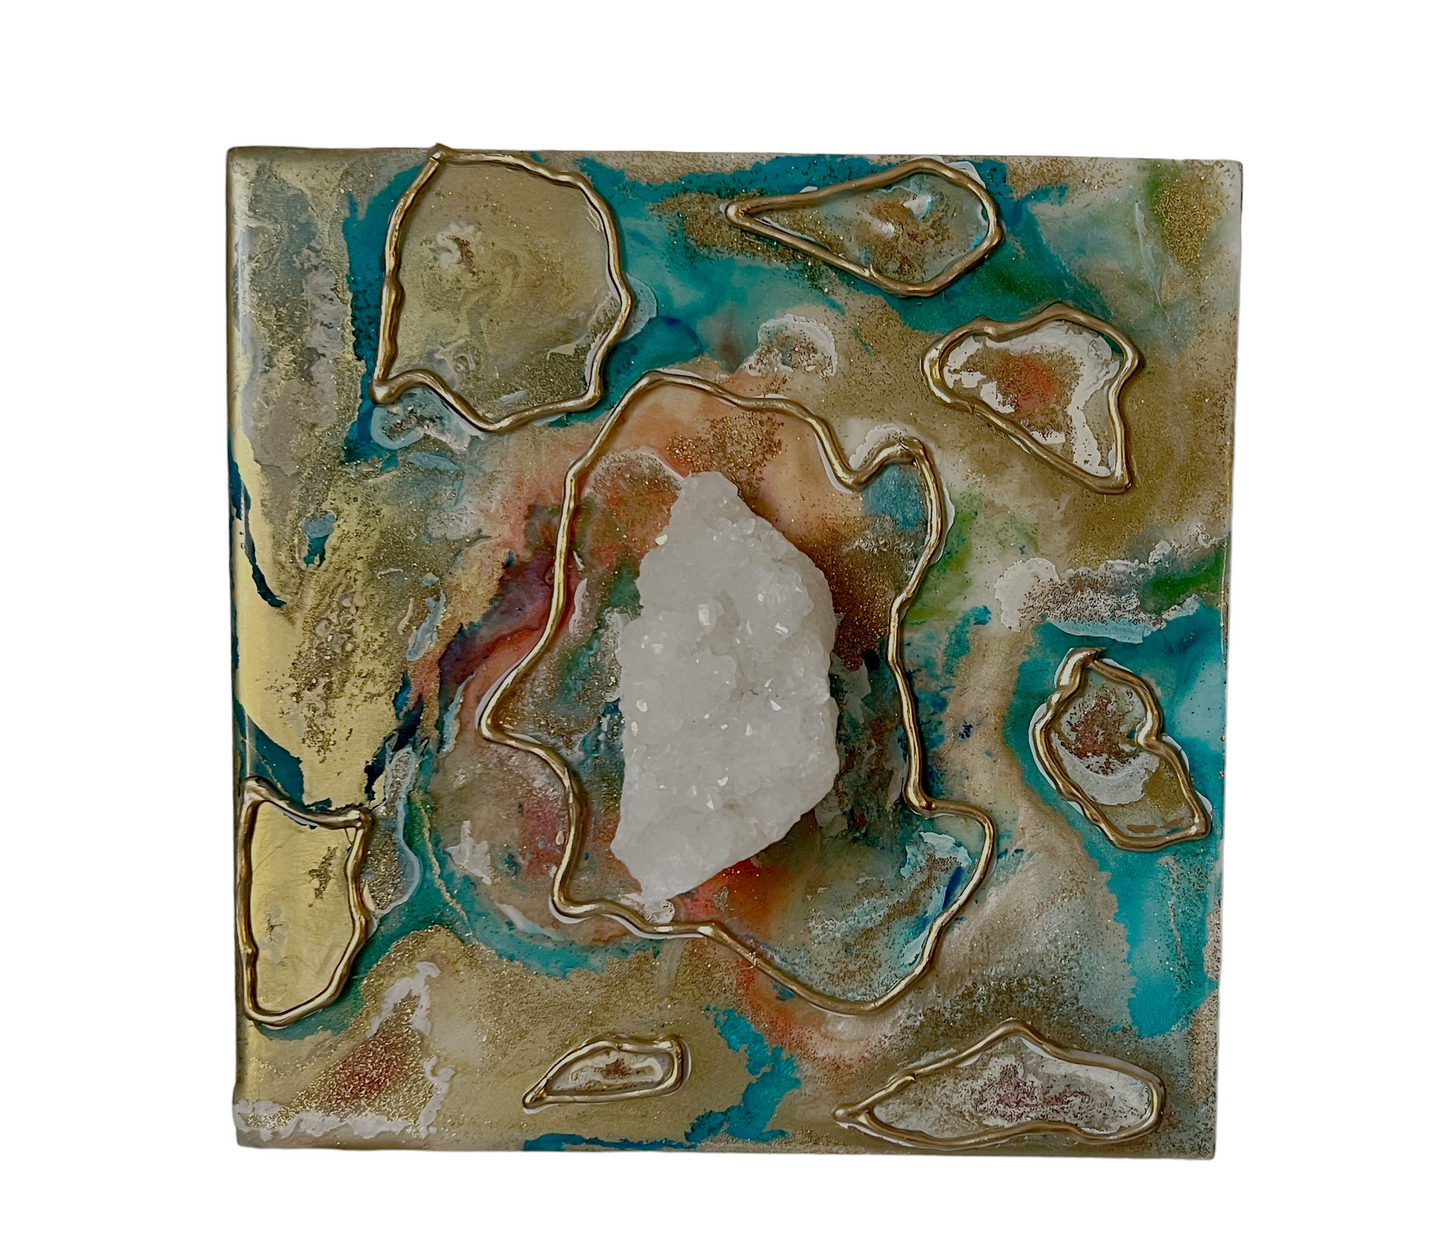 CLEANSING ENERGY /Quartz / Geode Inspired Wall Art / One of a Kind / Resin Art